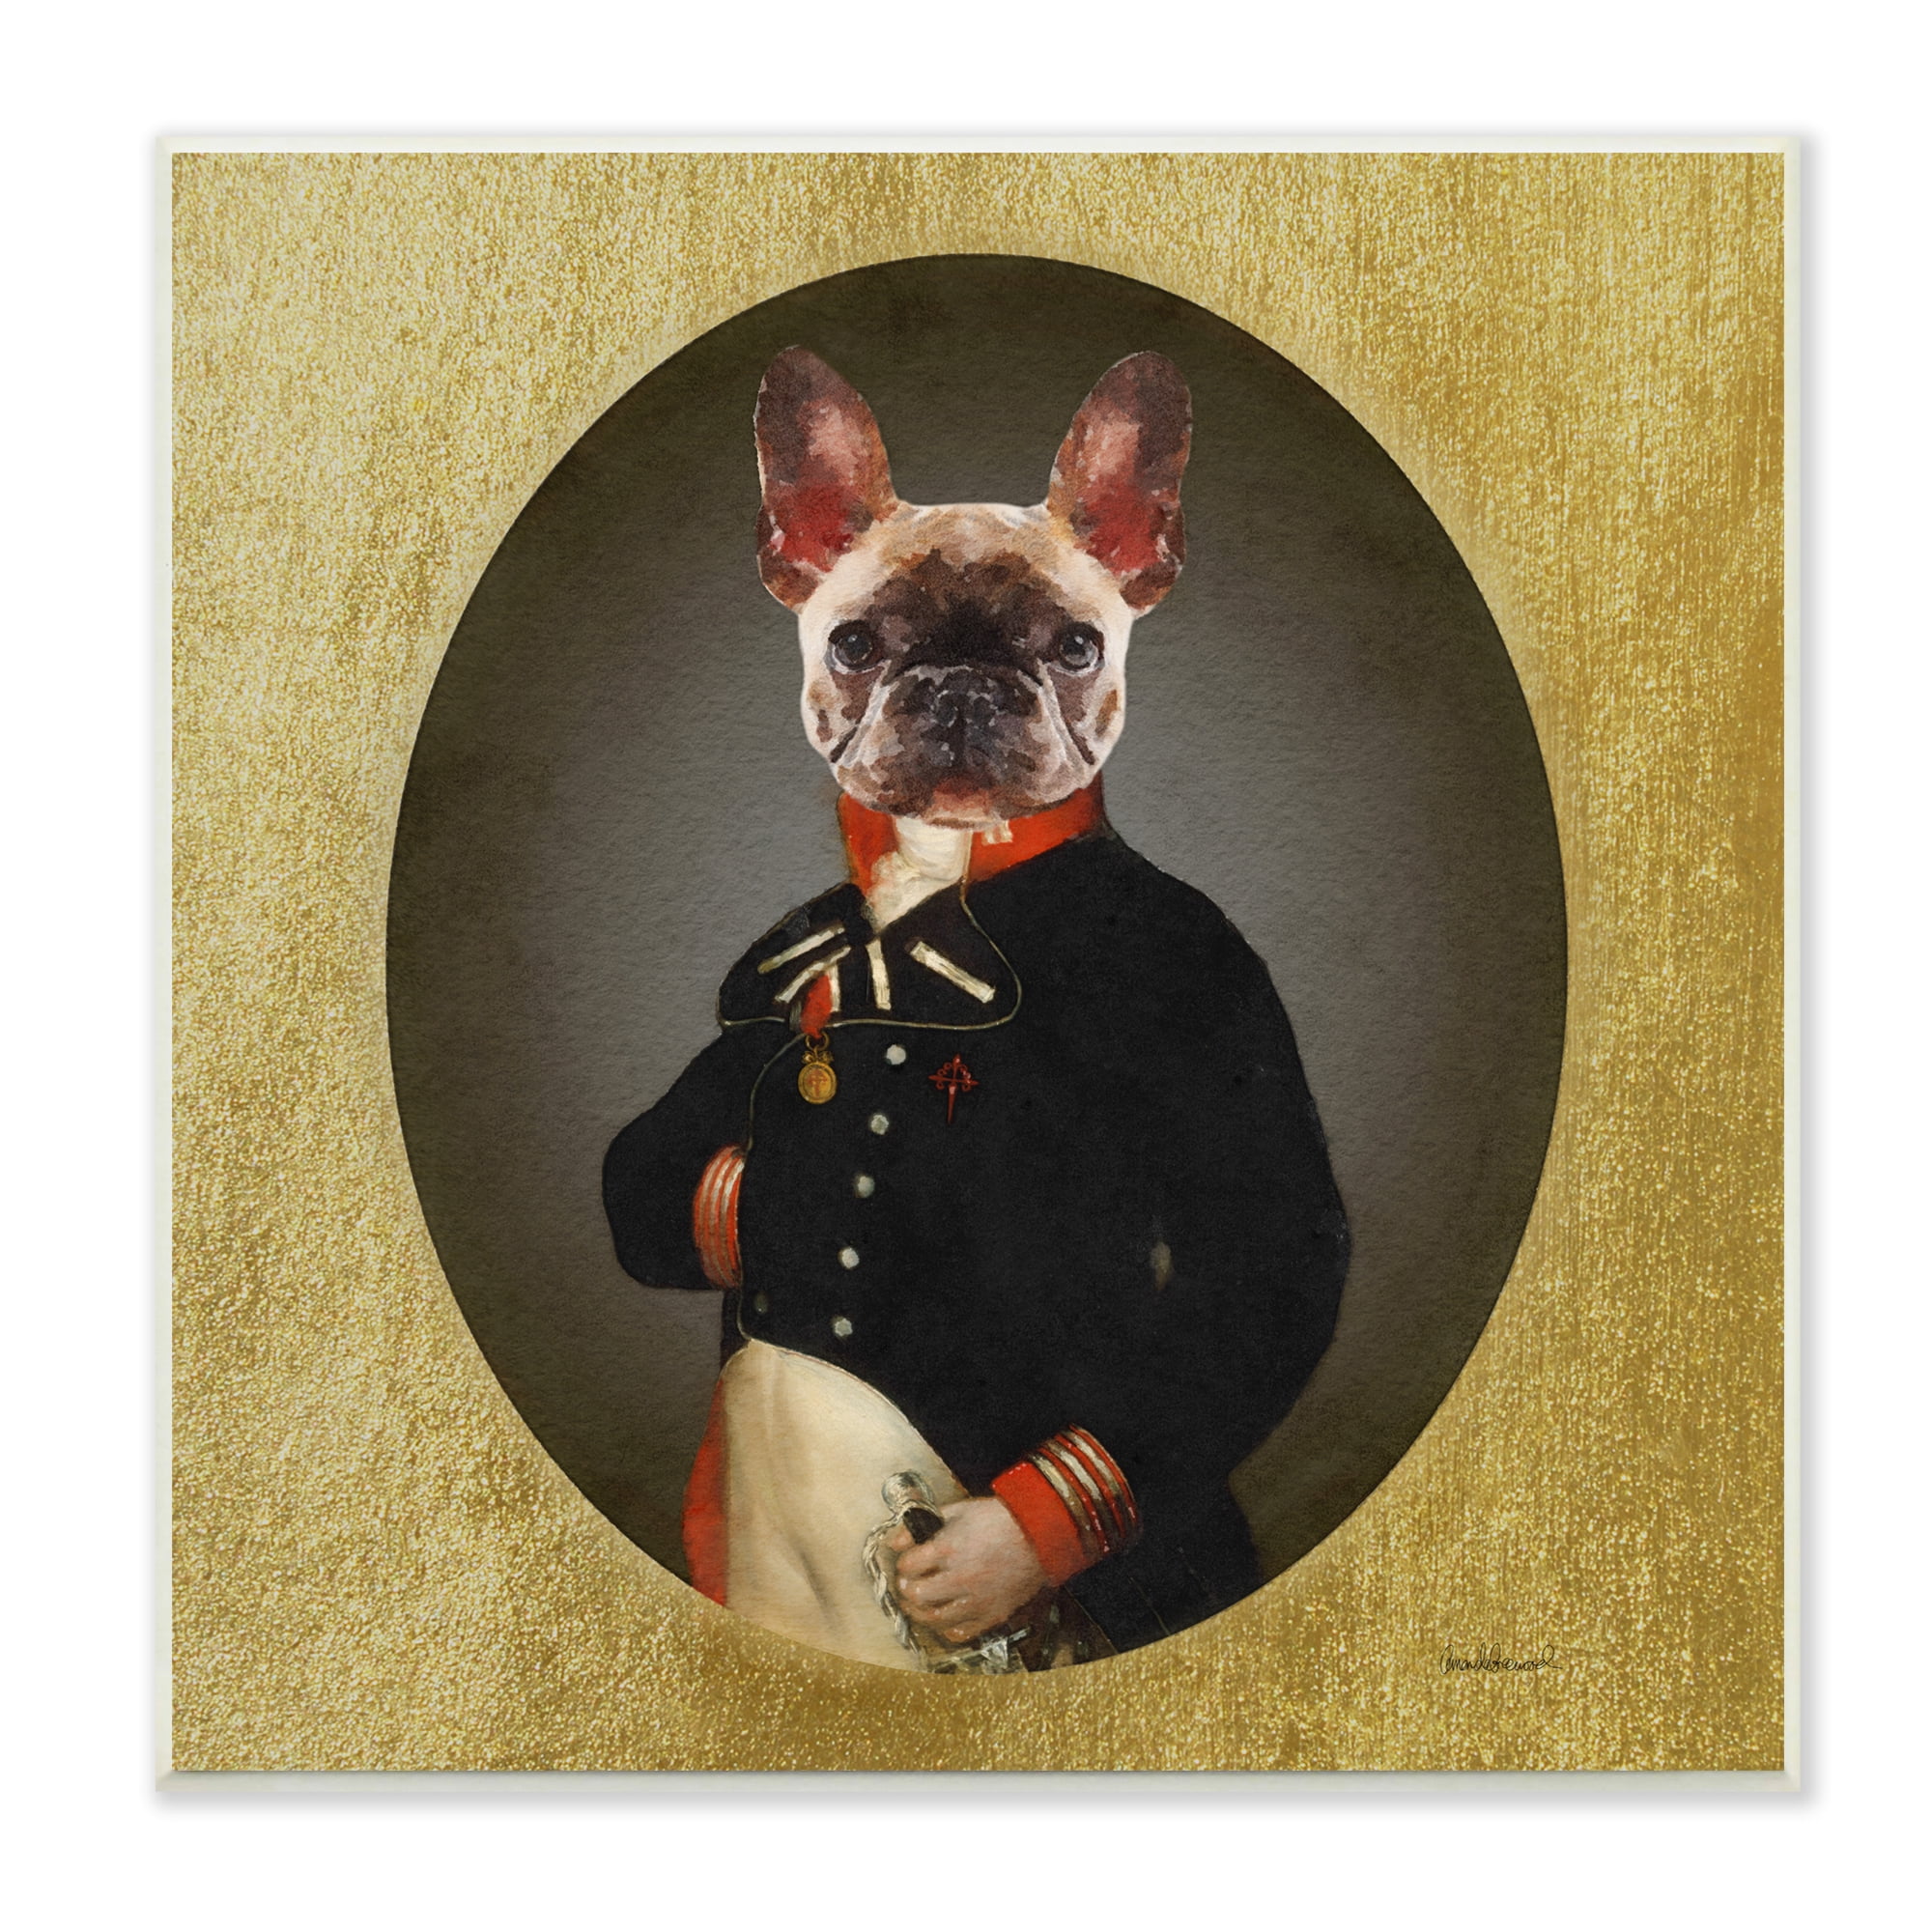 Amanda Greenwood Military French Bulldog Funny Conquistador Dog Fashion 12  x 12 Framed Painting Art Print, by Stupell Home Décor 